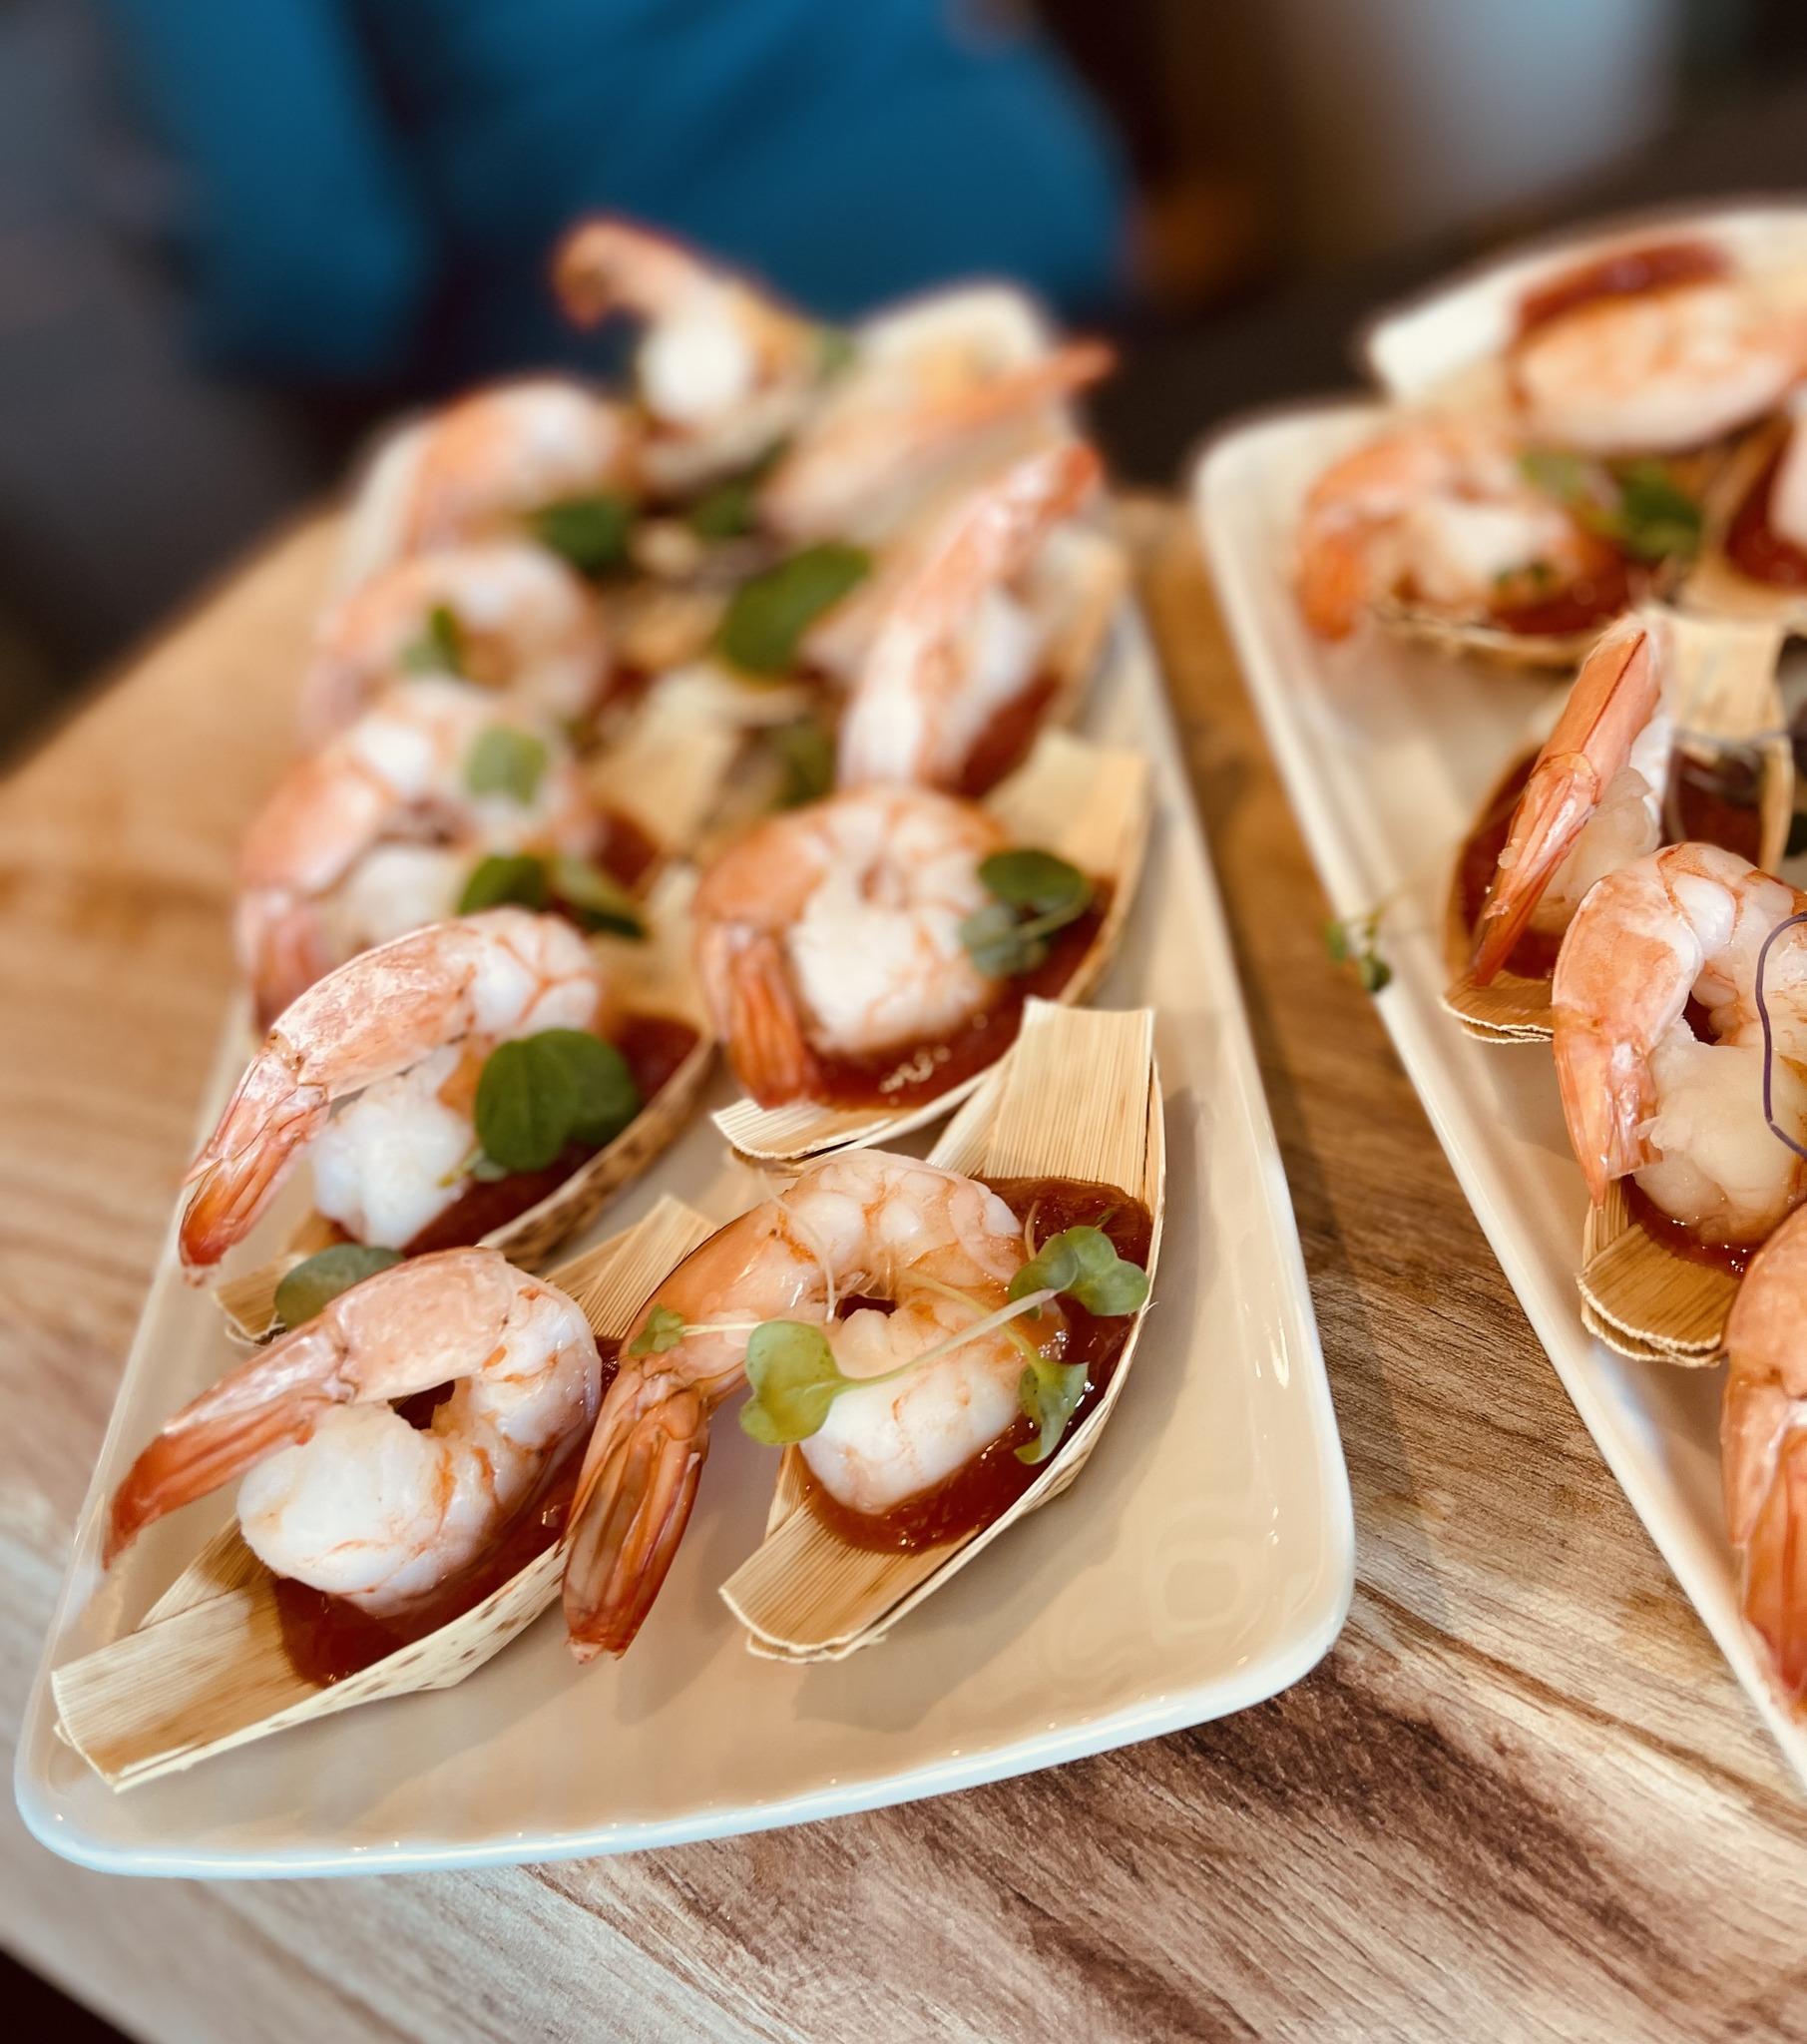 Plates of shrimp appetizers elegantly presented on small wooden boats with greens